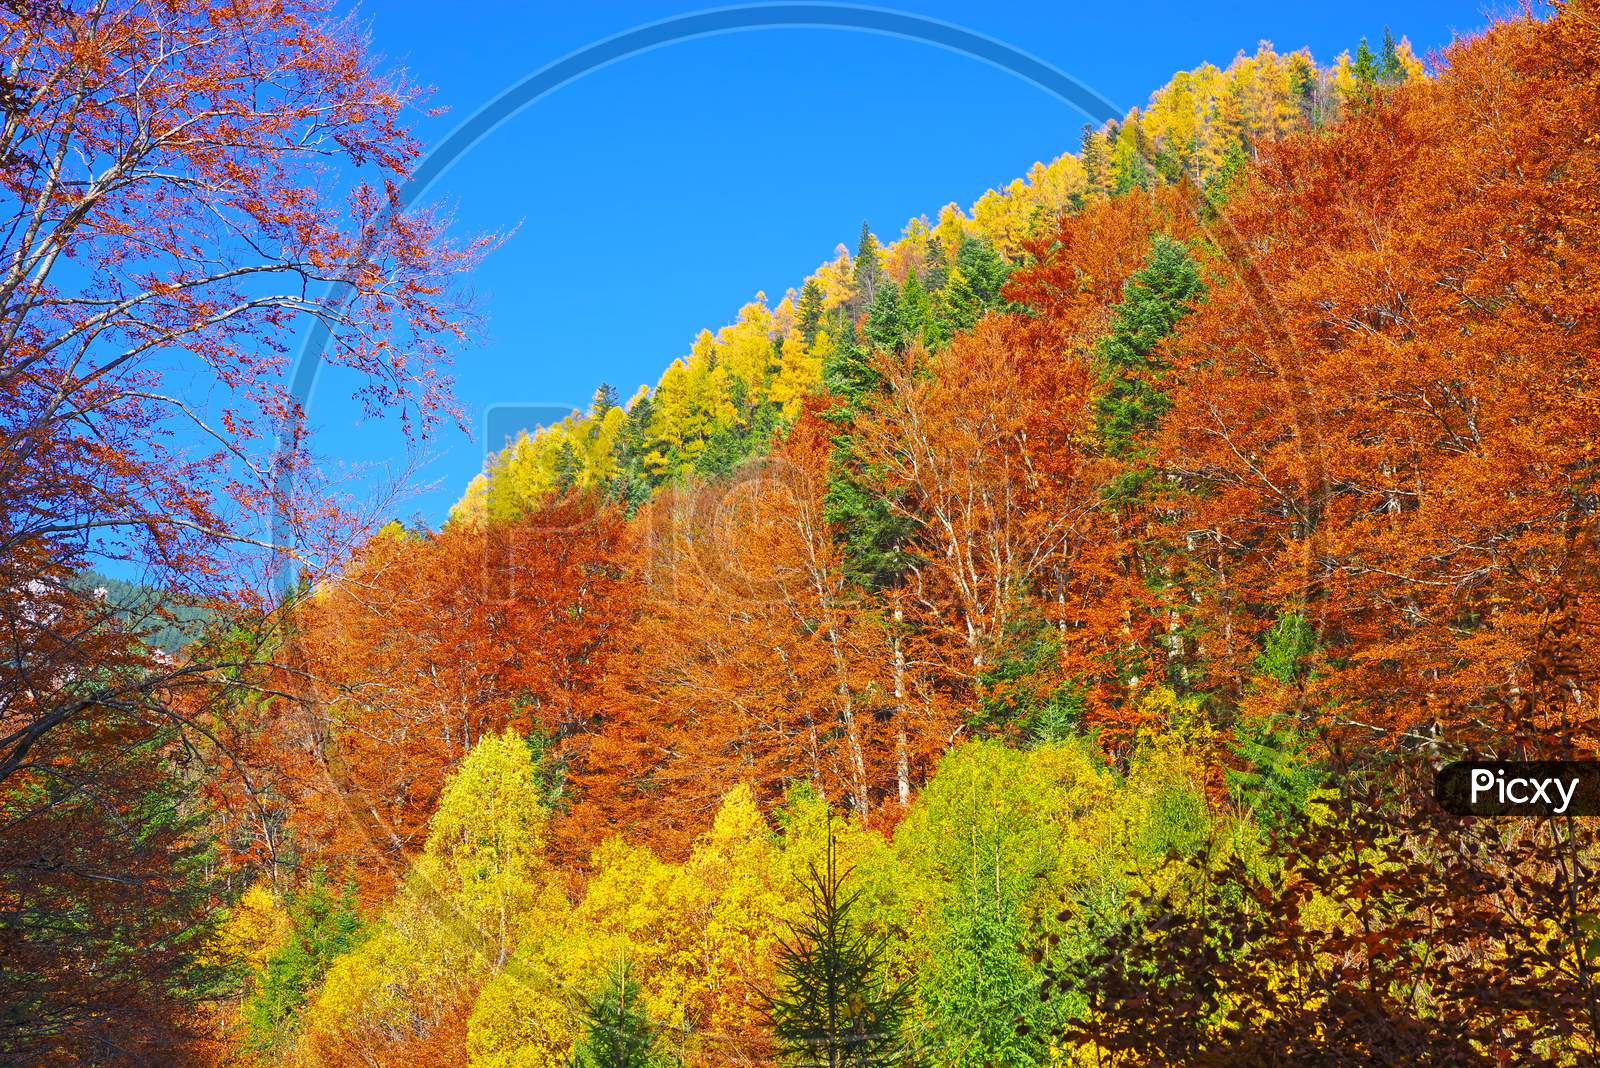 Autumn Scenery Landscape With Colorful Forest